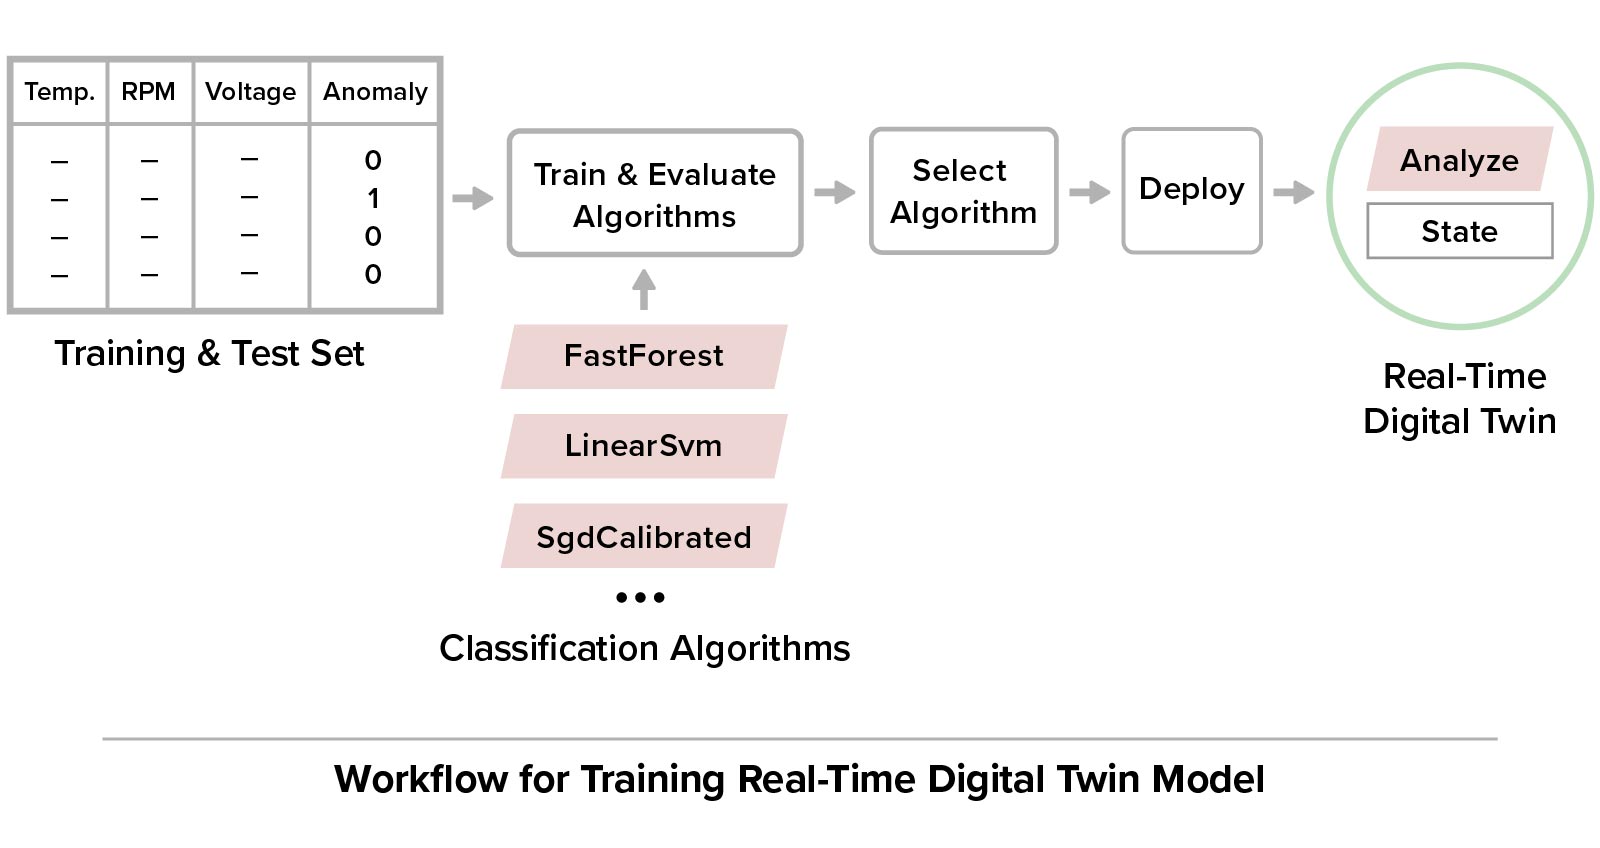 Using supervised learning, users train an ML algorithm for deployment in a real-time digital twin.